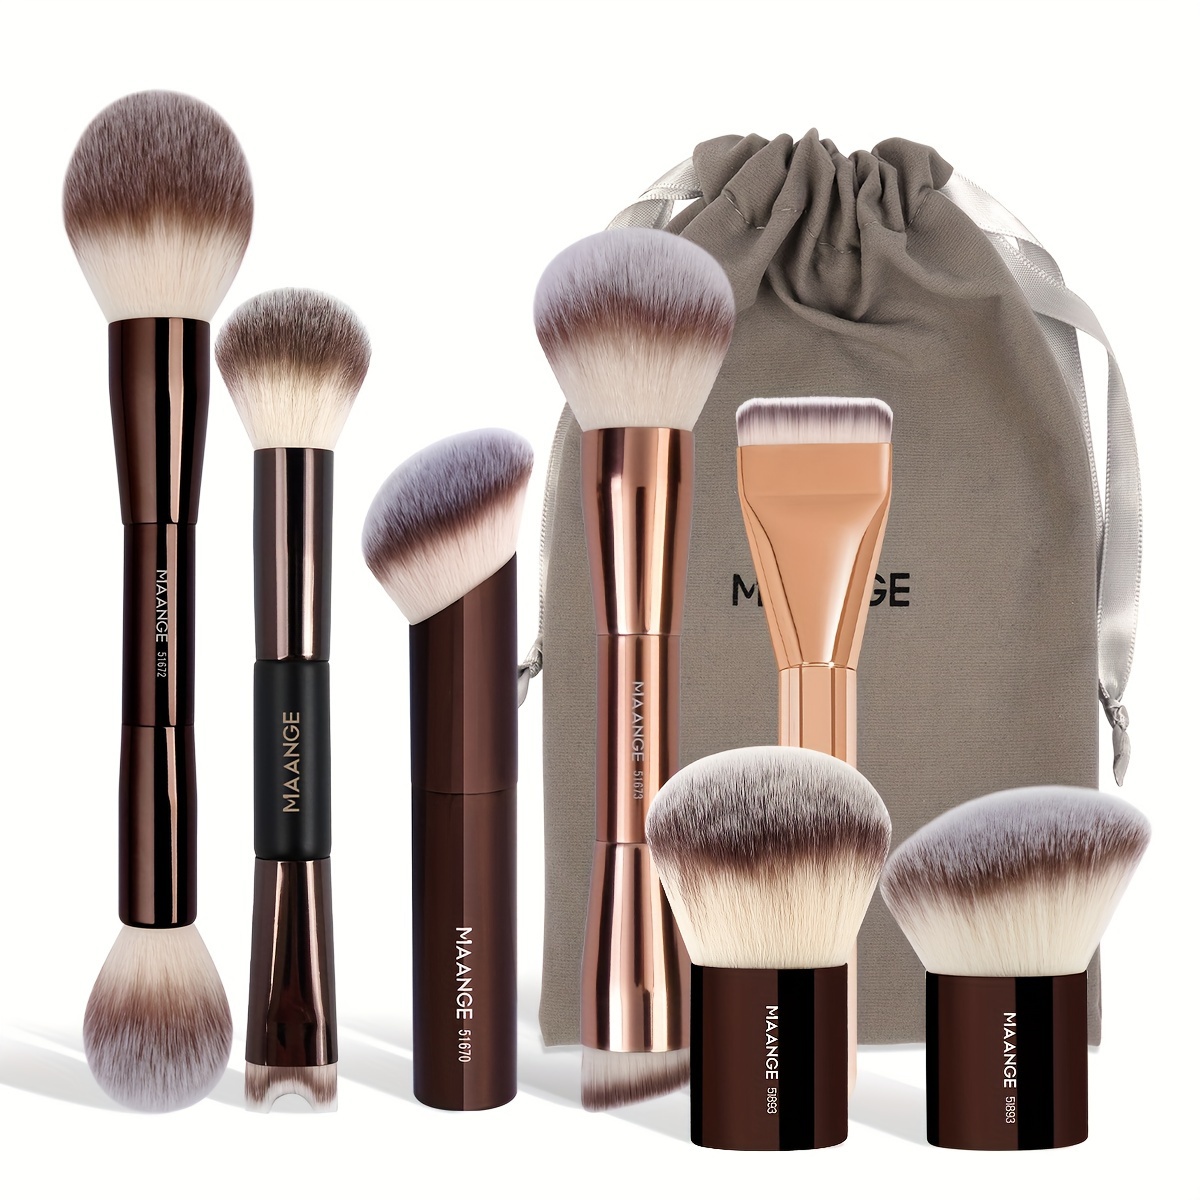 

sleek" Maange 7-piece Luxury Makeup Brush Set With Velvet Bag - Soft Nylon Bristles For All Skin Types, Includes Foundation, Blush, Contour & More - Perfect For Beginners & Travel